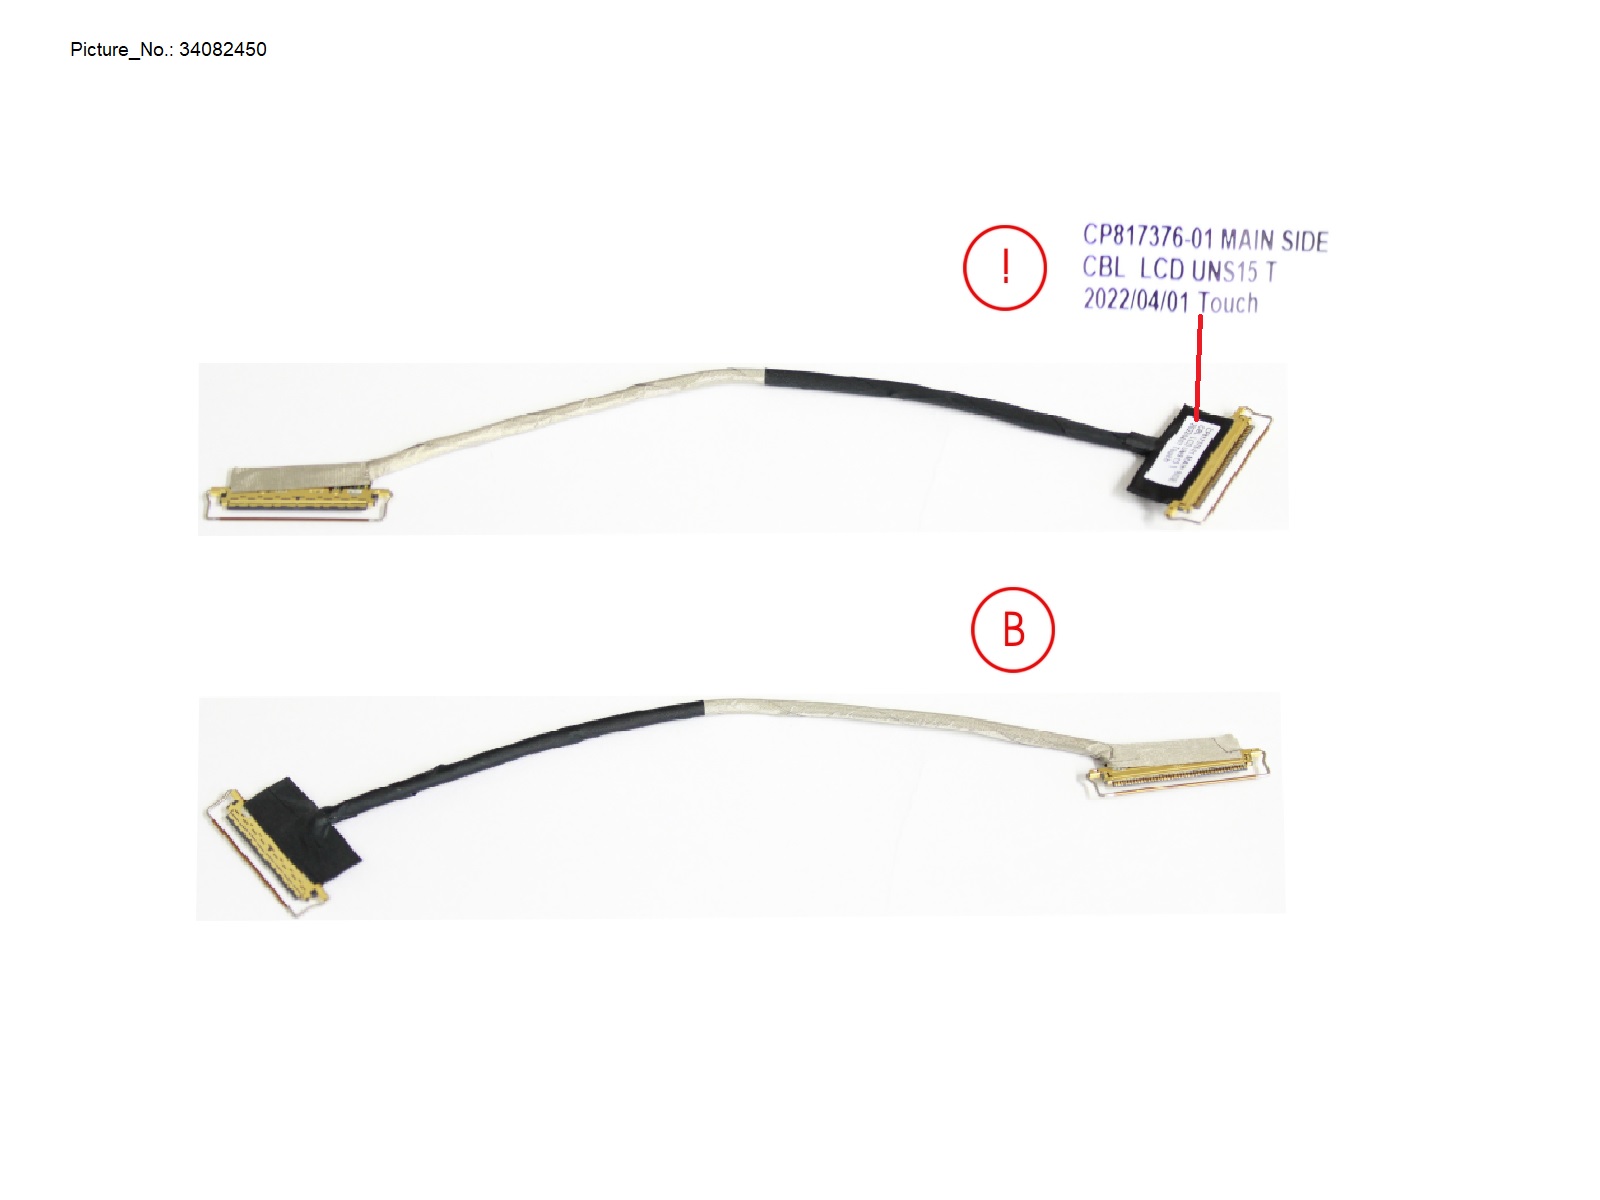 CABLE, LCD FOR TOUCH (LG PANEL)